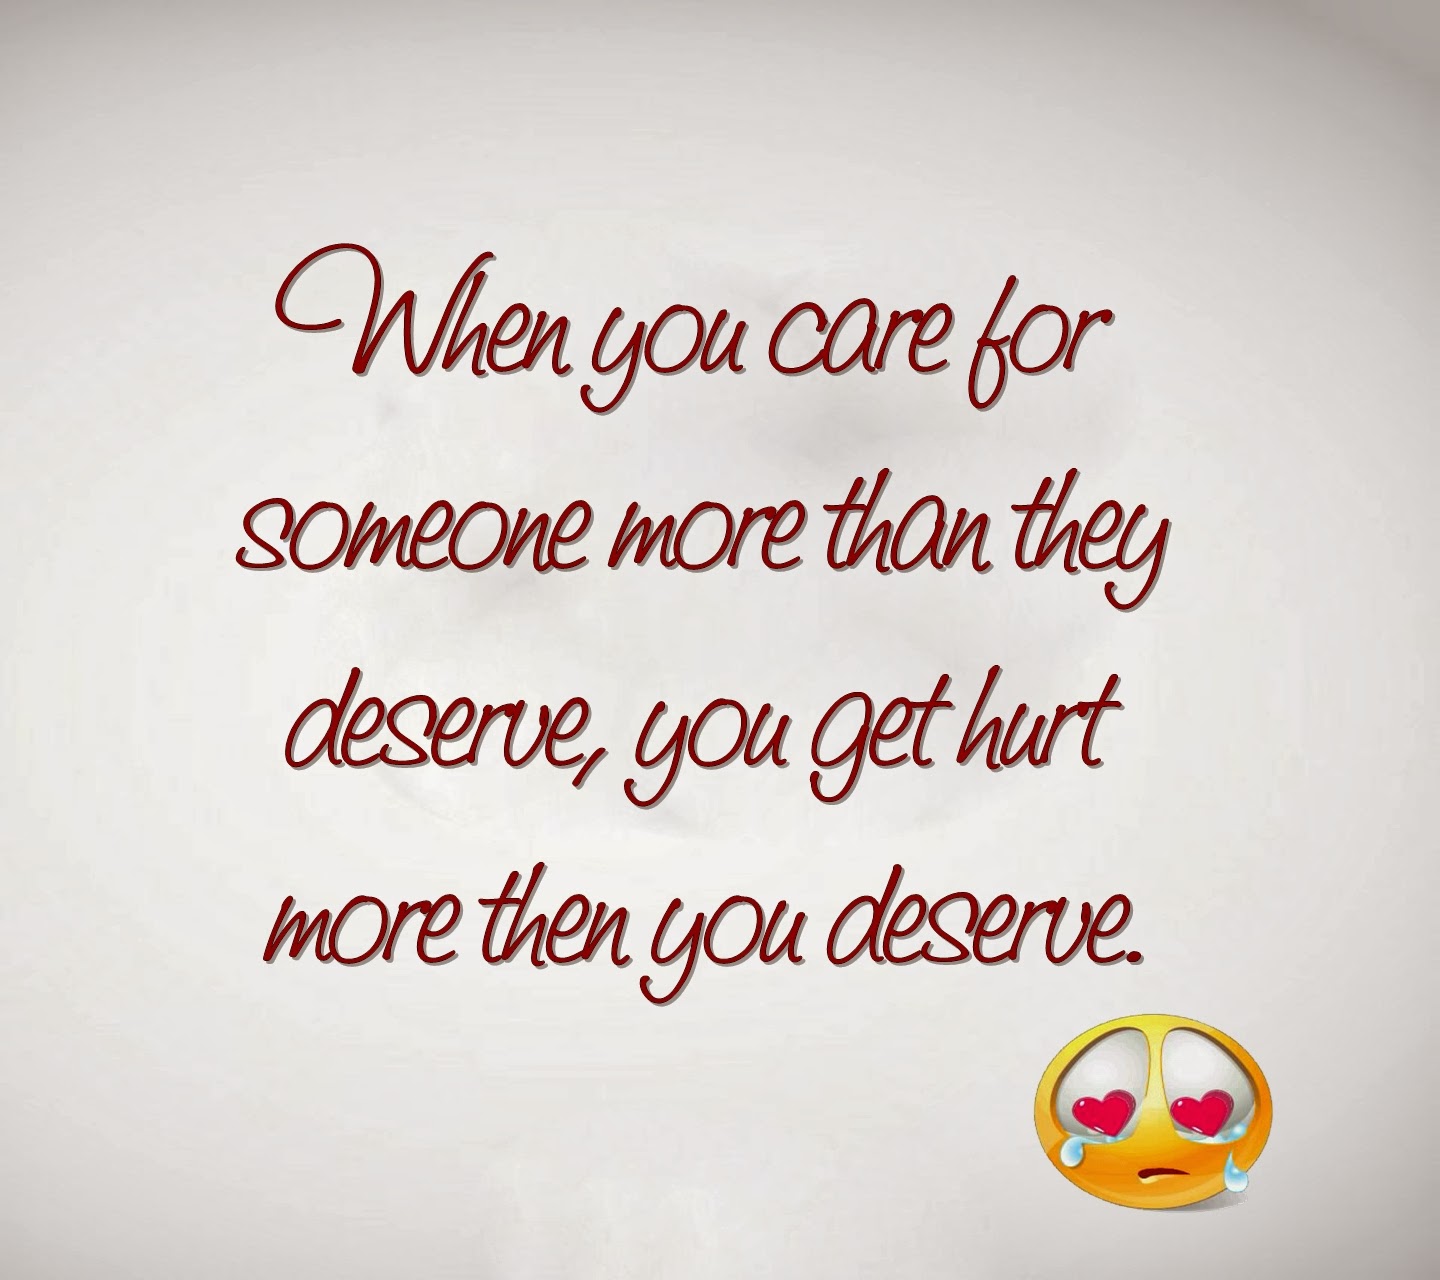 http://best-quotes-and-sayings.blogspot.com/2013/12/when-you-care.html